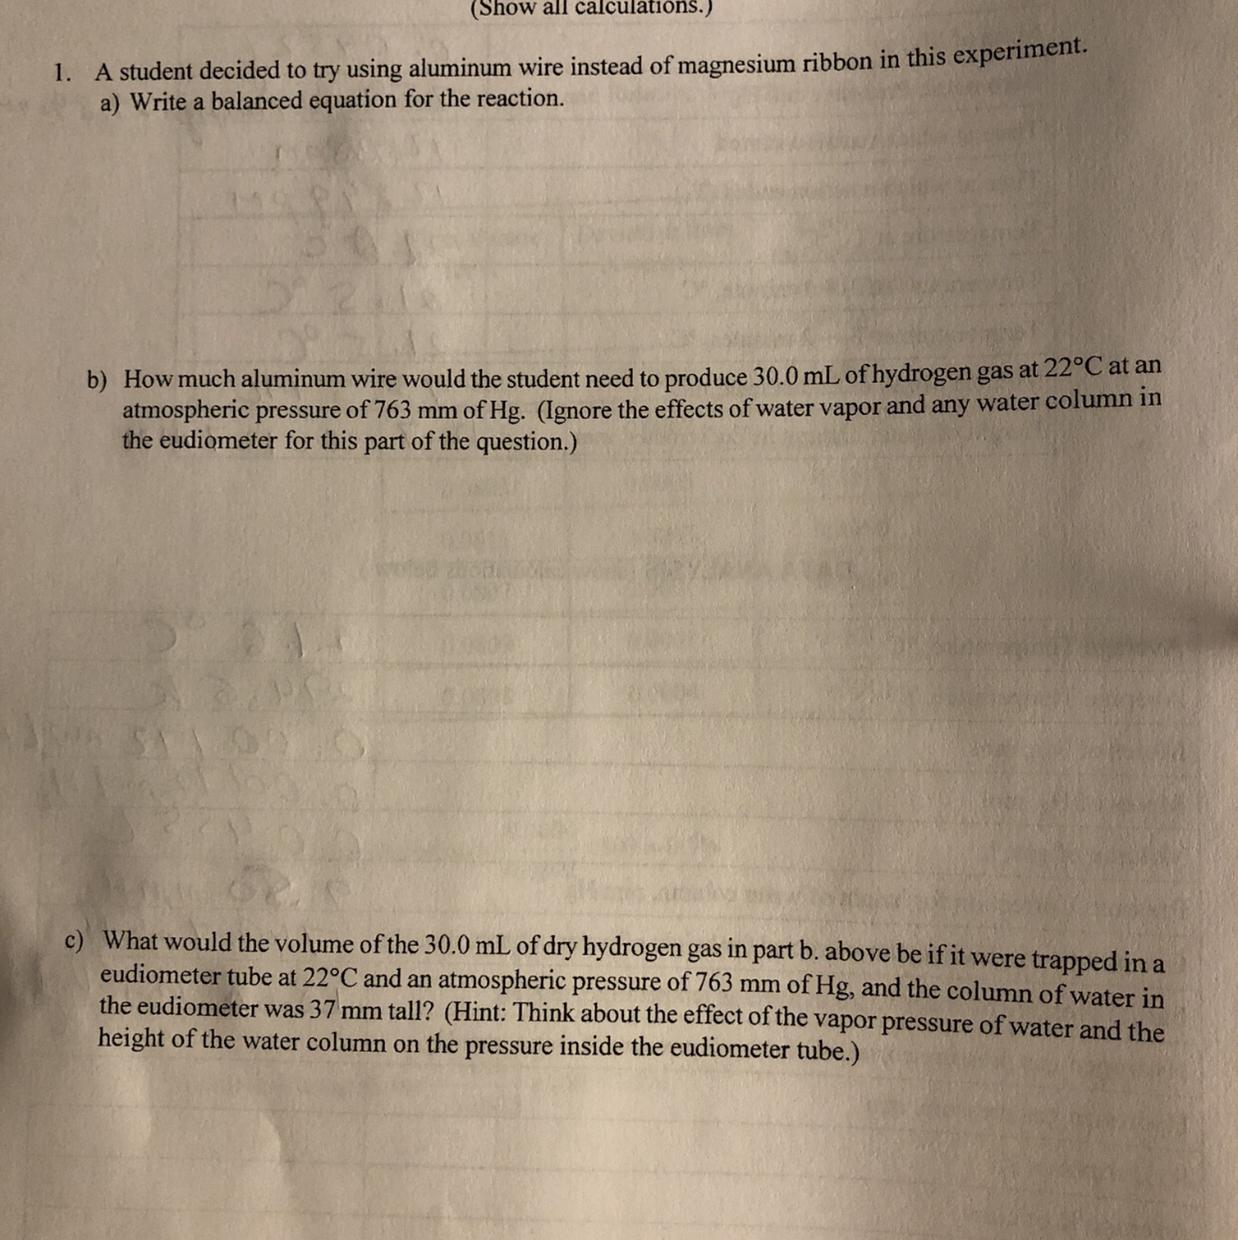 Please Help With 2nd And 3rd Questions In Question B) Aluminum Reacts With Hydrocloric Acid